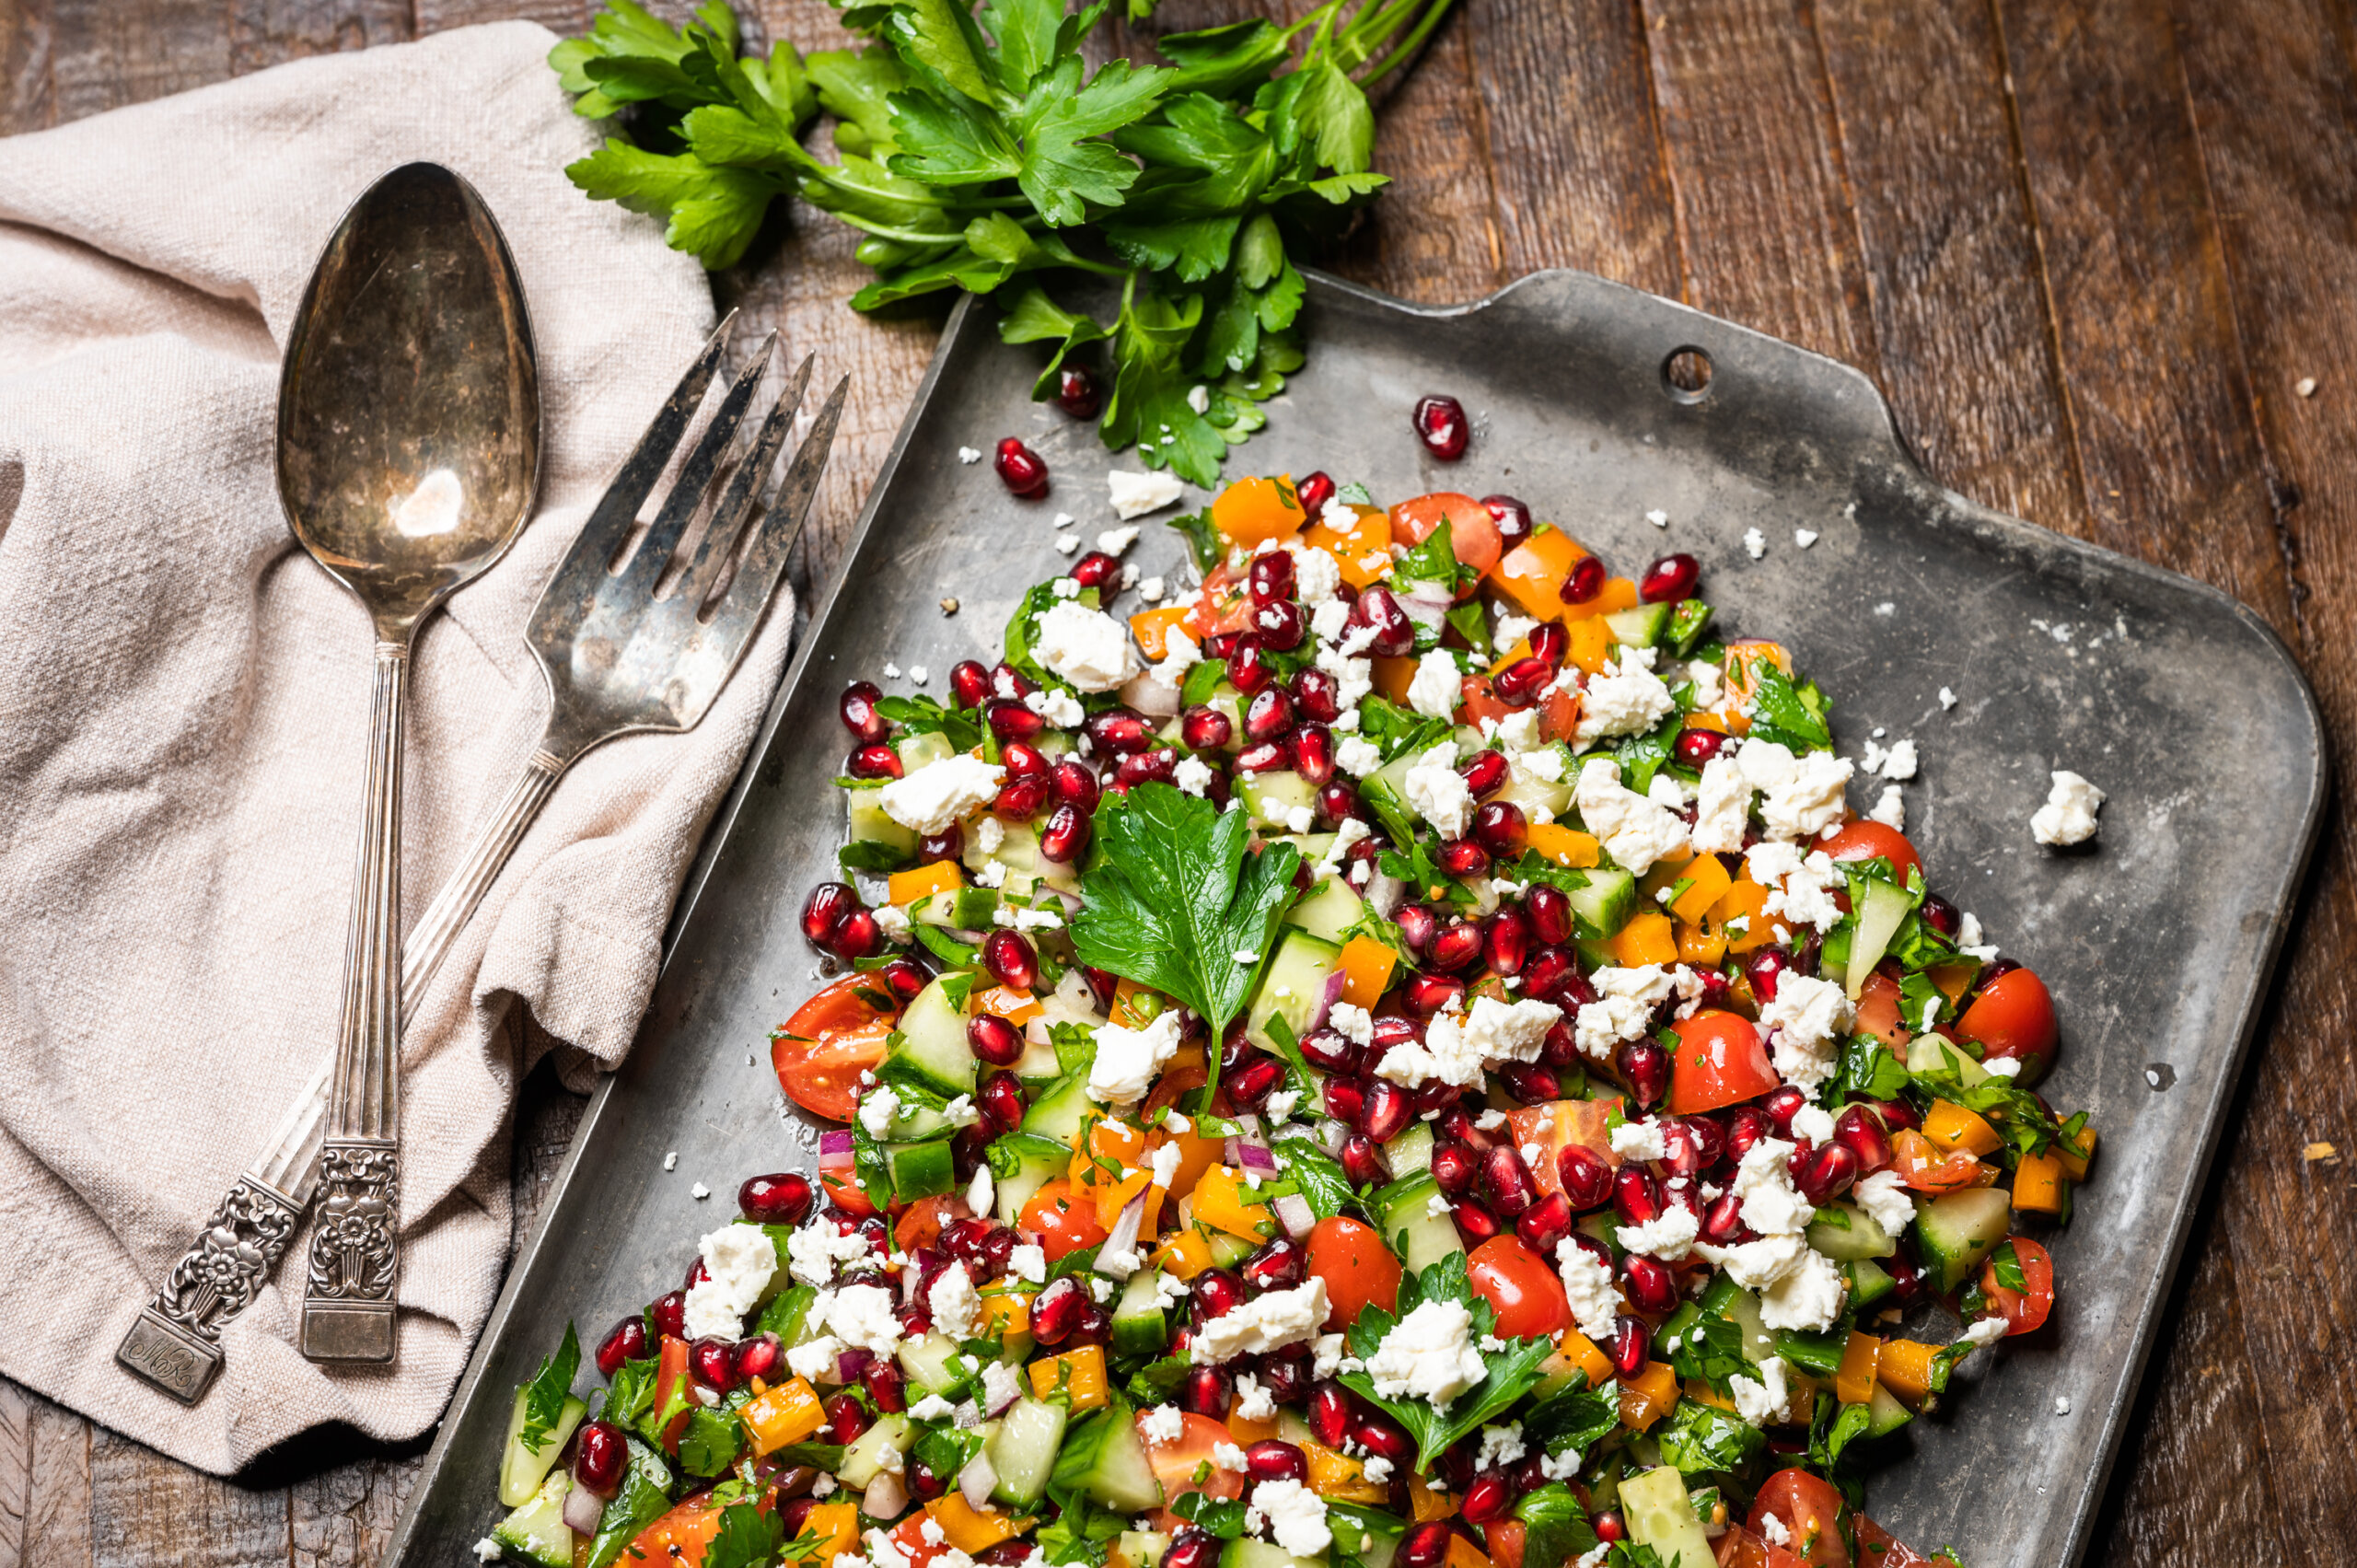 Aliza Sokolow's recipe for Israeli Salad with cucumber, bell pepper, parsley, red onion, and pomegranate arils.